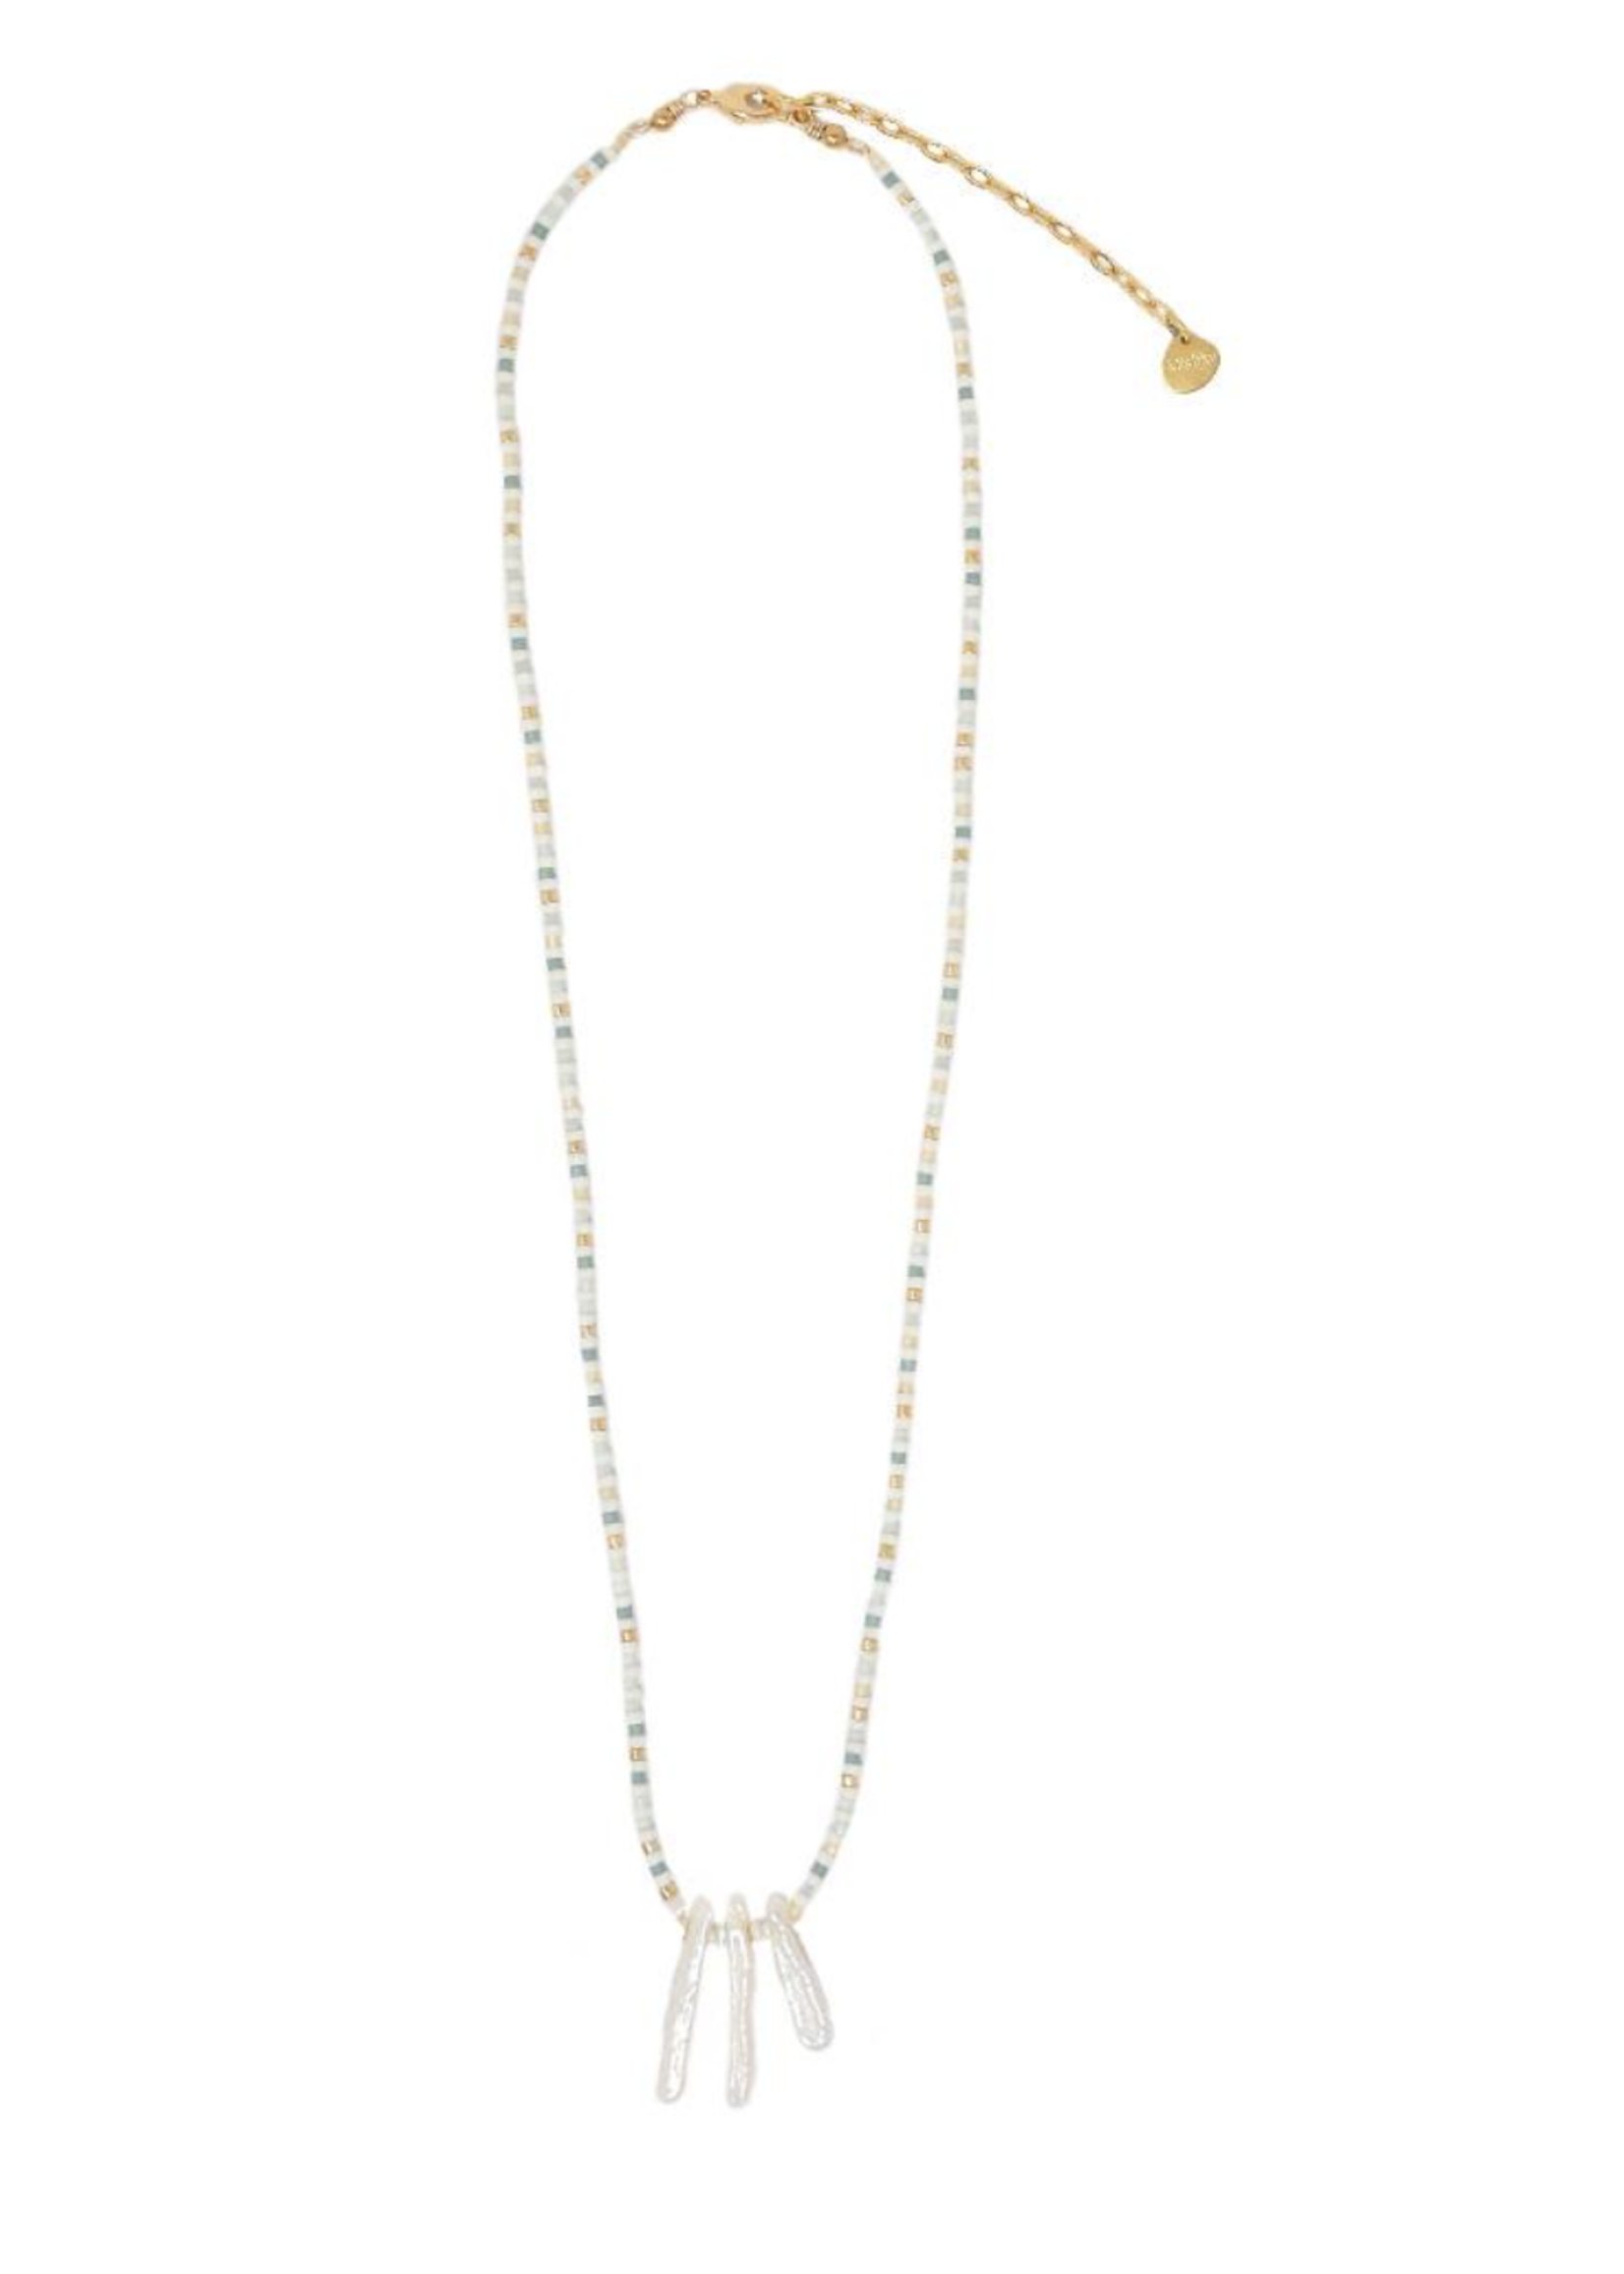 Mishky Skinny Pearls Necklace